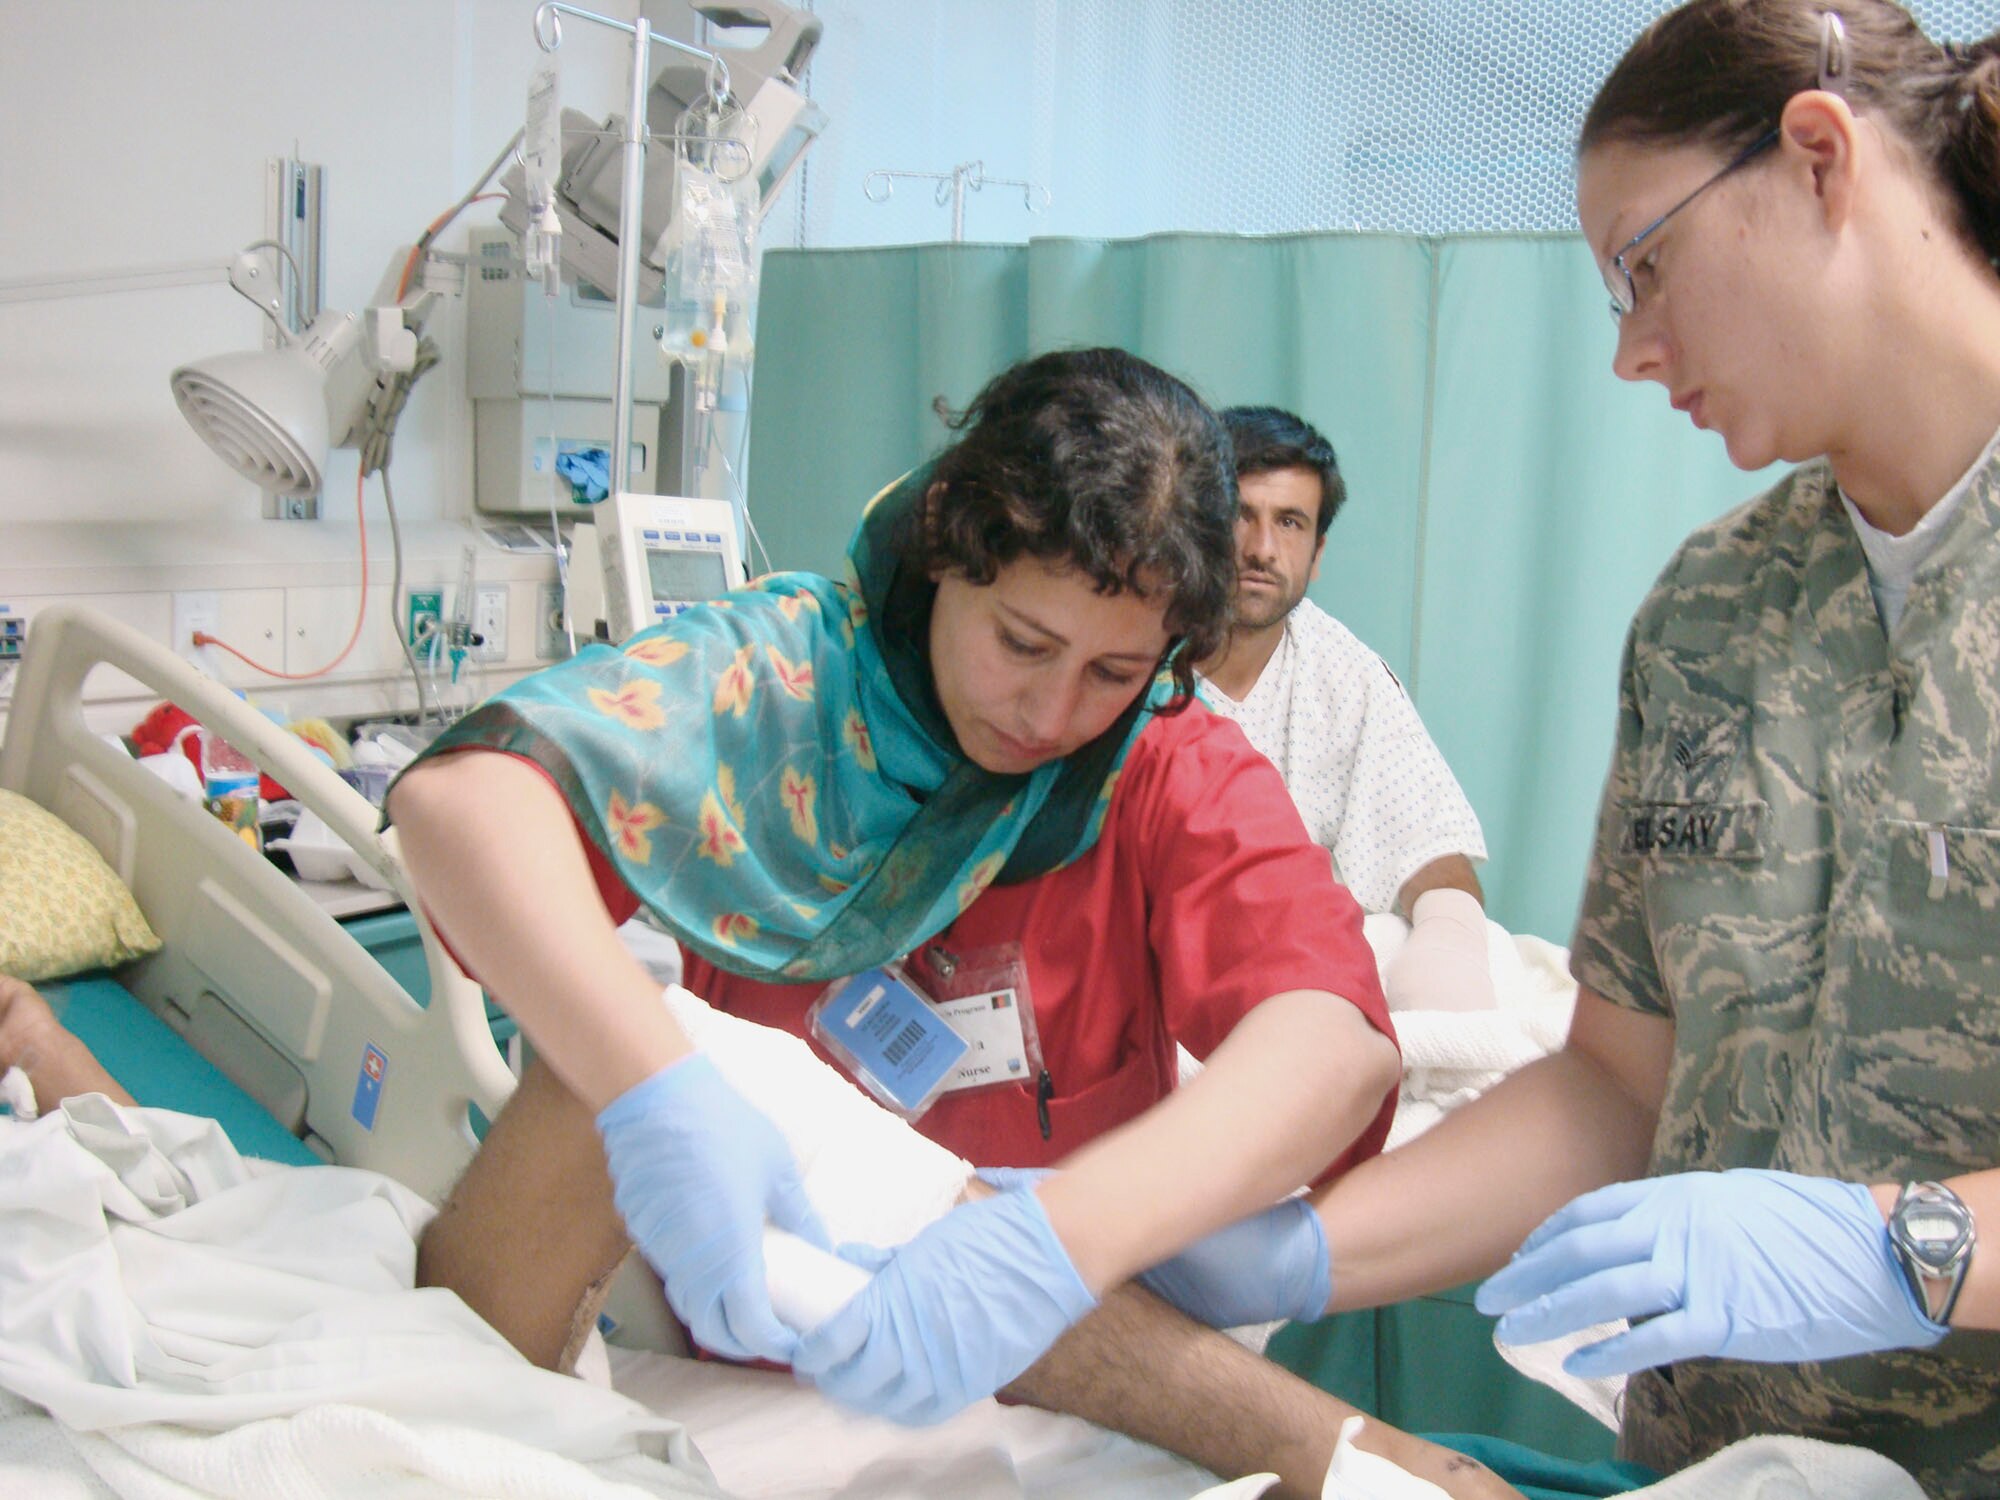 Afghan National Army soldier Laila Farahi (left) bandages a patient's leg Oct. 14, 2009, at Bagram Airfield, Afghanistan. She attended a special two-week mentorship program at the Criag Joint Theater Hospital here to work alongside U.S. doctors and nurses to hone her medical skills and get firsthand experience with trauma-based care. She was one of the first women to ever attend the special program. (Courtesy photo) 